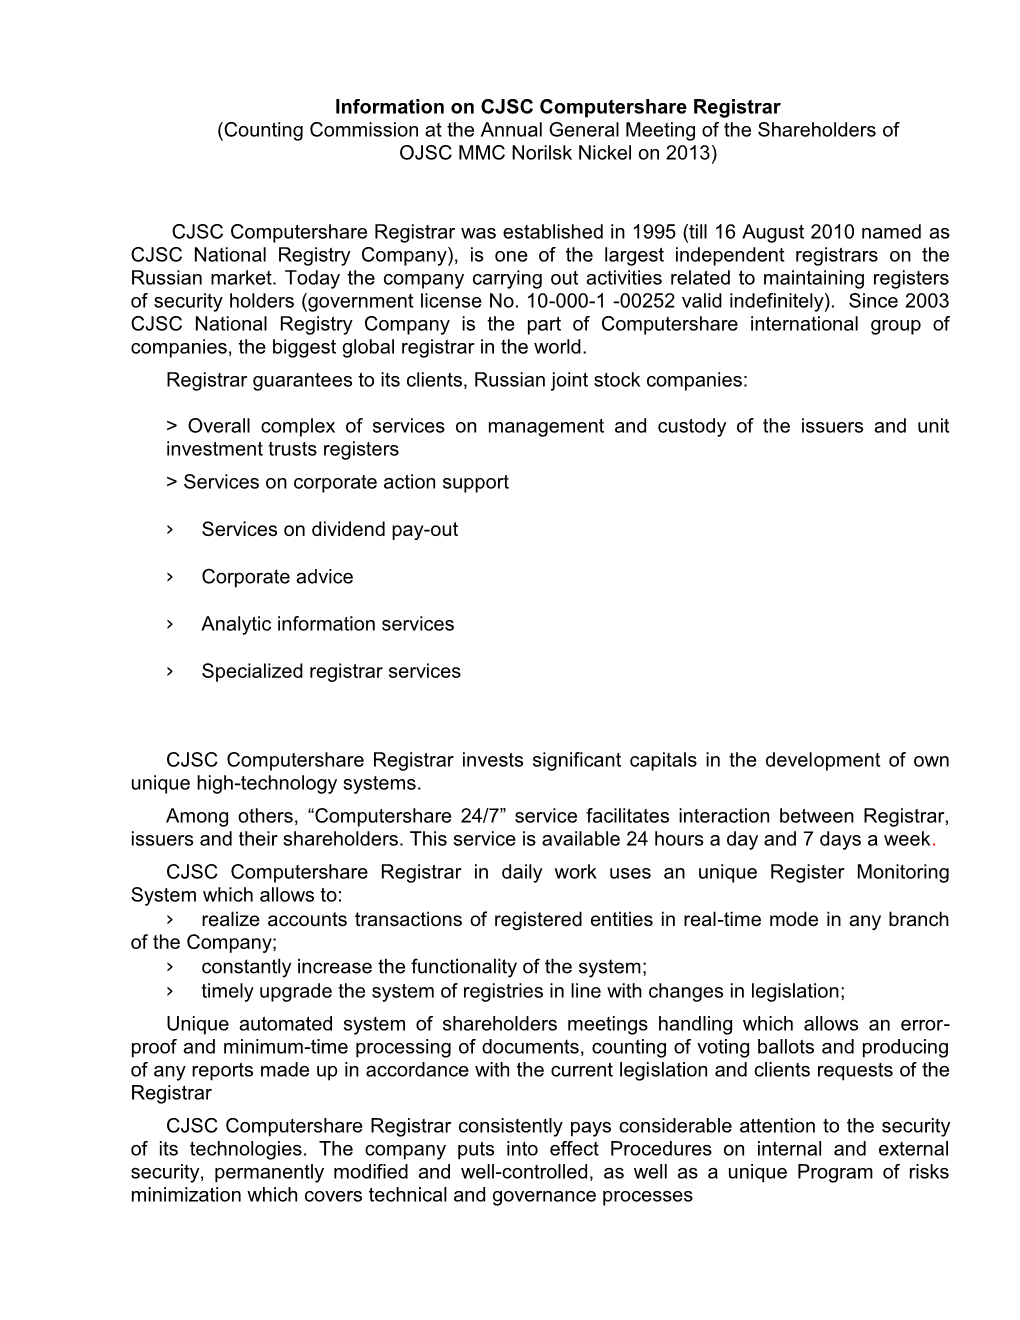 Information on the CJSC Computershare Registrar, Performing the Functions of the Counting Commission of the Company